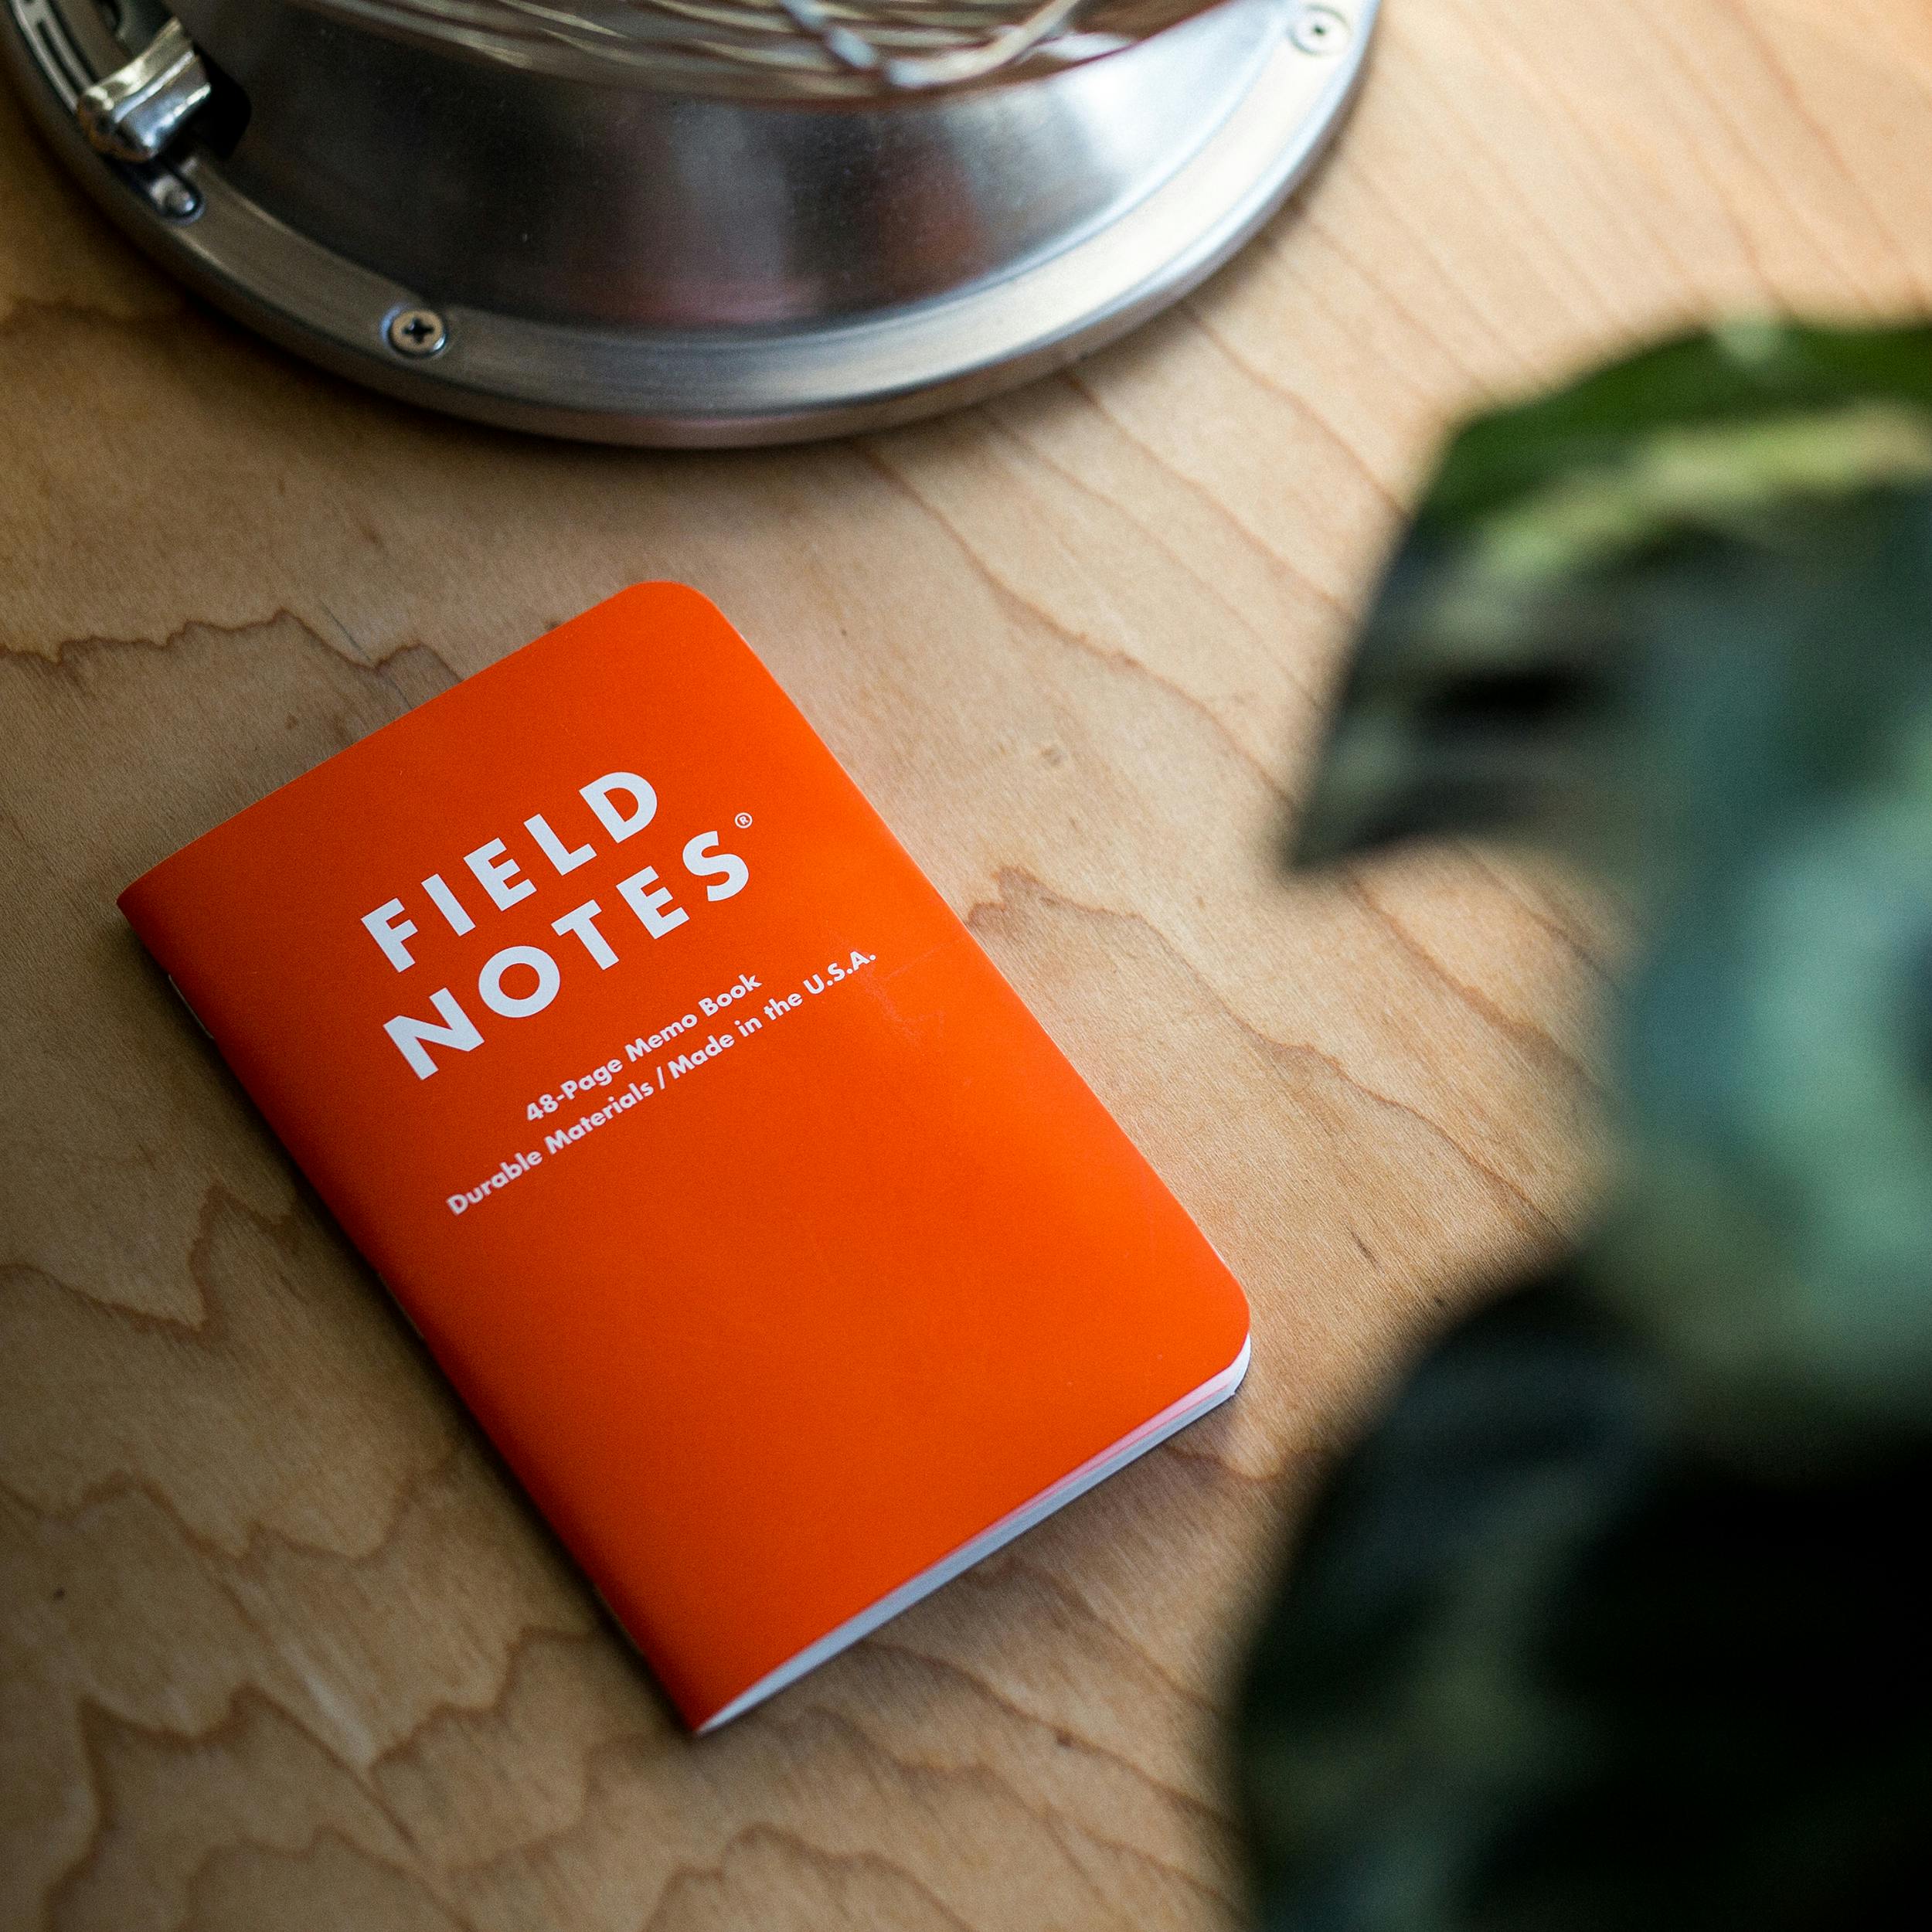 expedition notebook FIELD NOTES⎟FIELD NOTES⎟LE COMPTOIR AMERICAIN